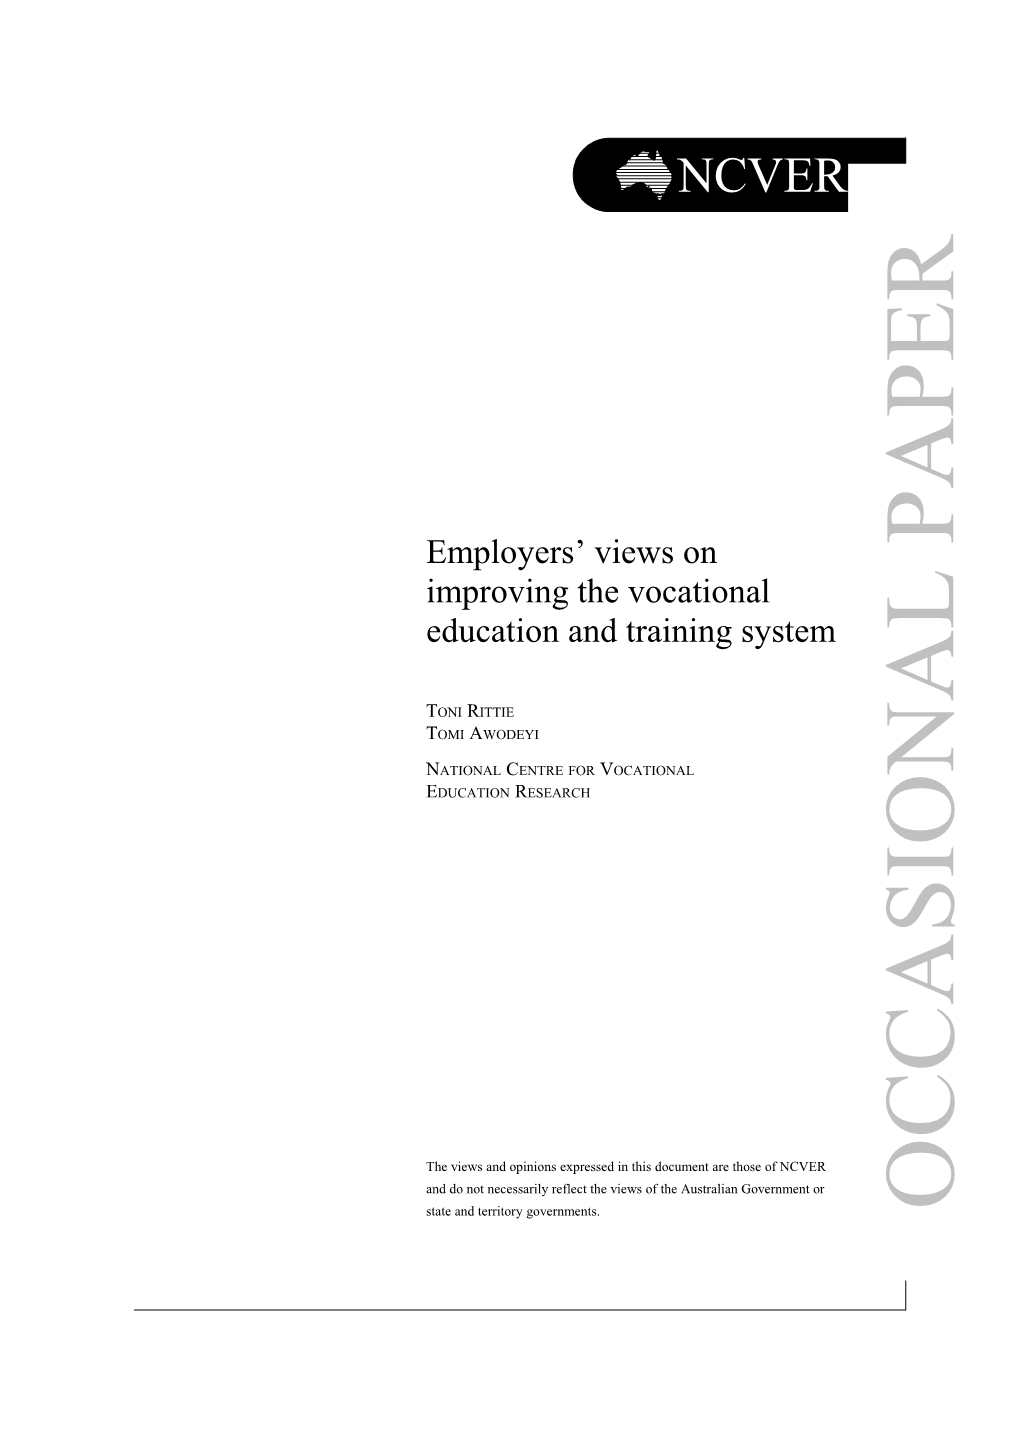 Employers' Views Occasional Paper